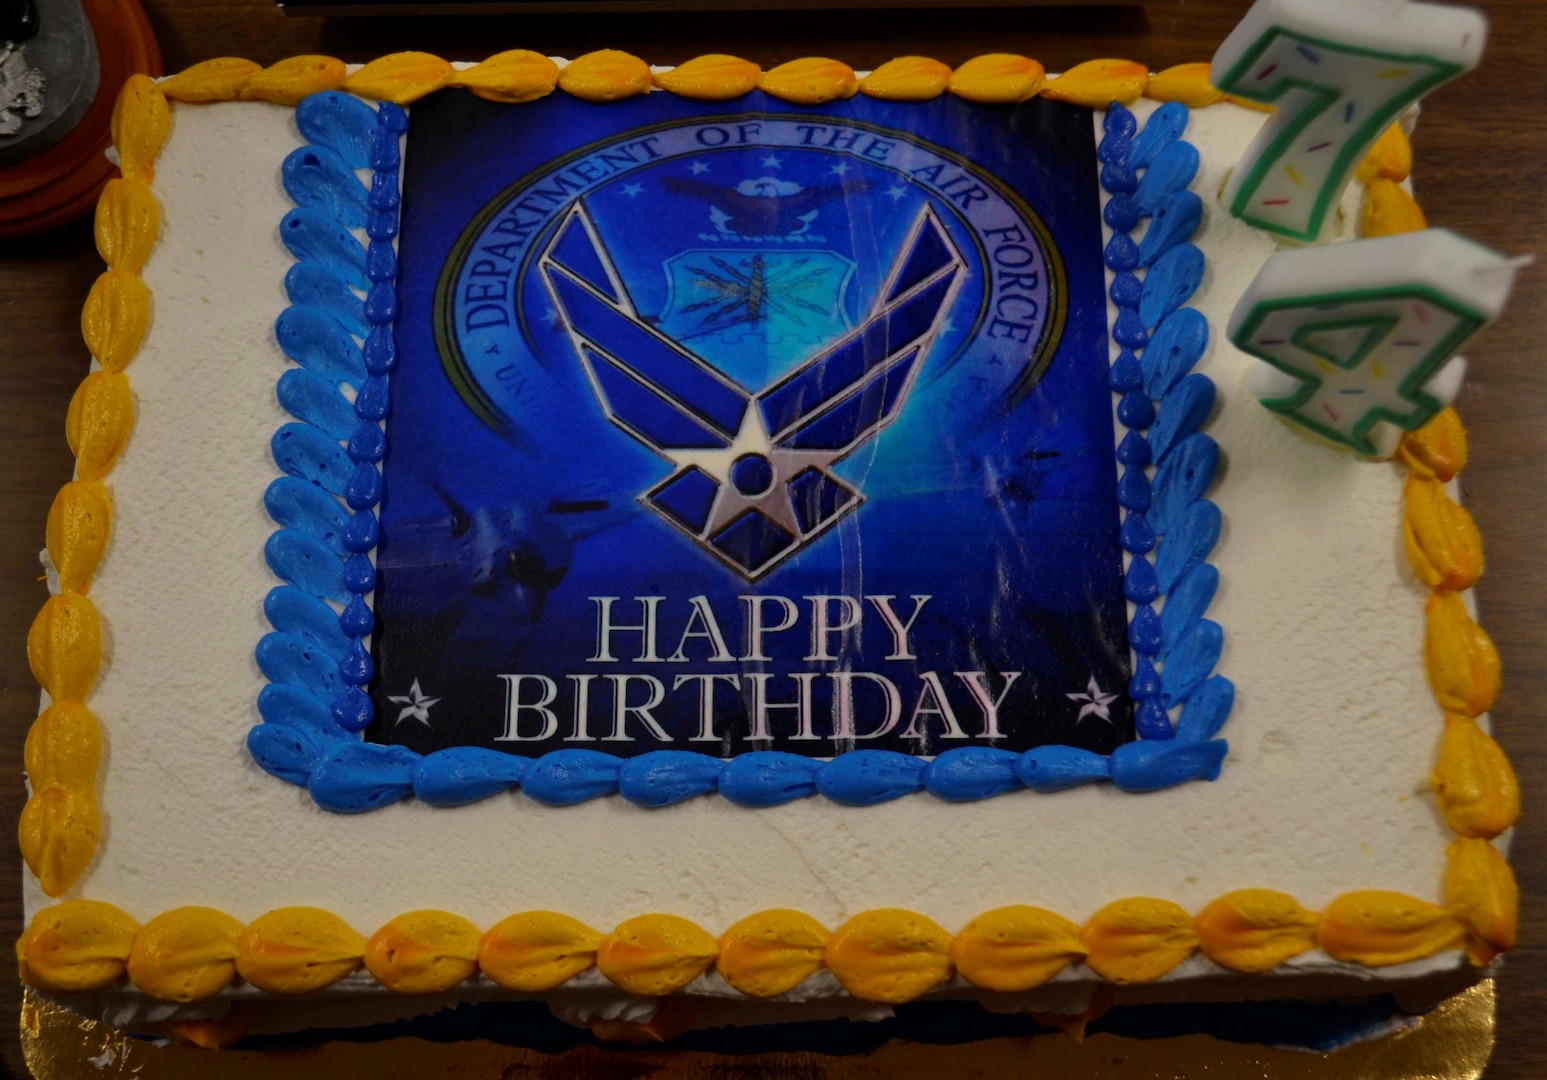 A cake adorned with the Air Force emblem and candles representing the service’s 74th birthday was served during the Defense Logistics Agency Troop Support’s celebration of the Air Force birthday September 14, 2021 in Philadelphia.